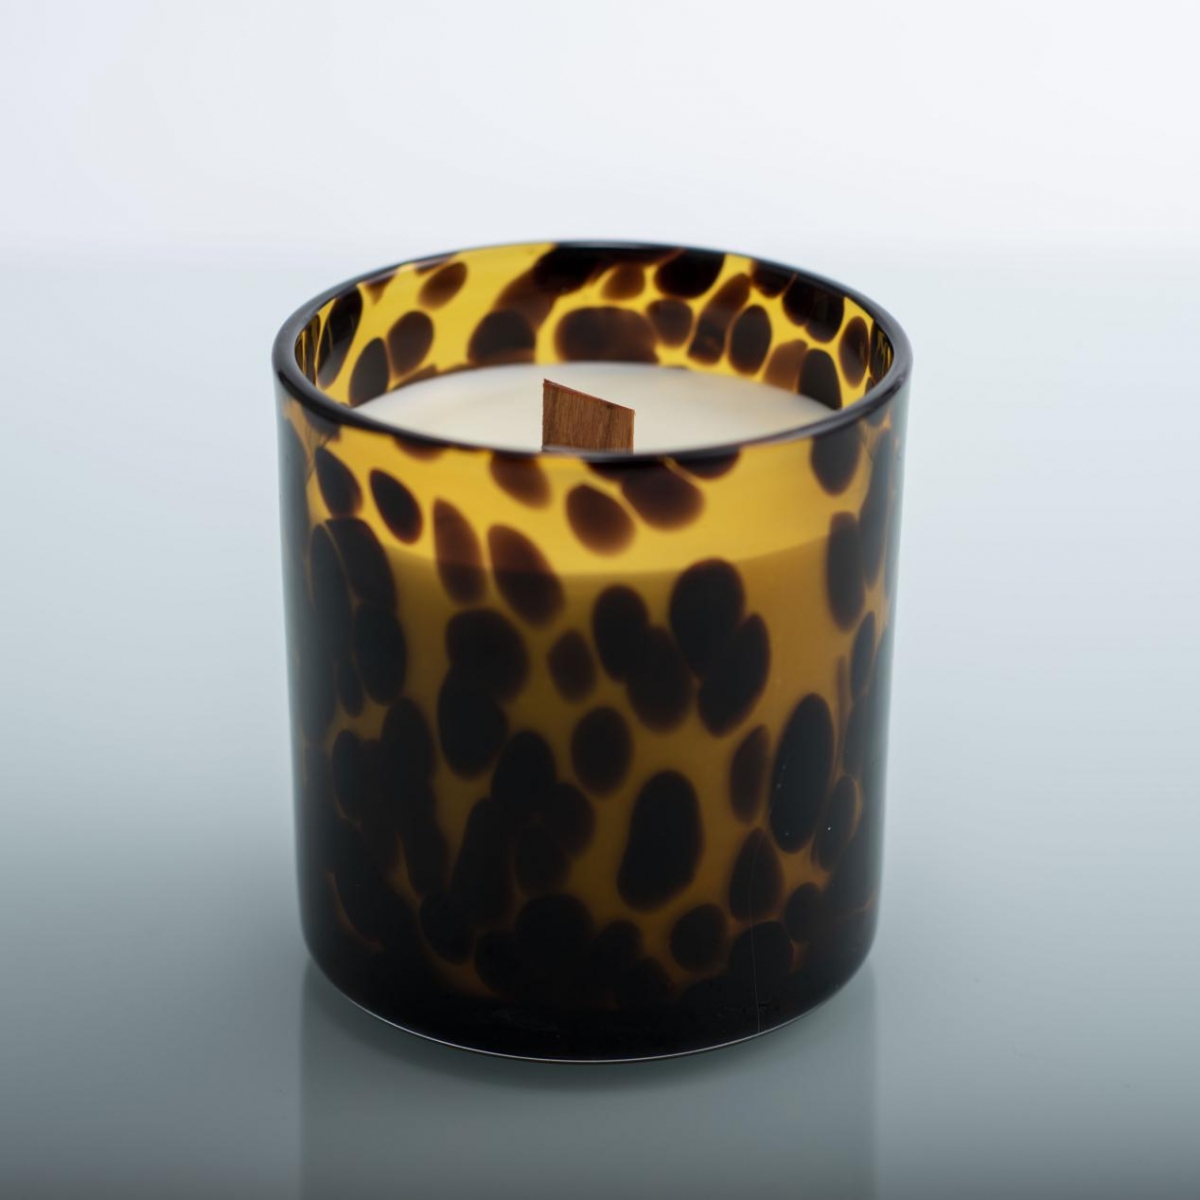 Tortoise Shell Glass Scented Candles ：Tom Ford OUD Wood ,Luxury Perfume Candles , Beeswax Scented Candles ,Glaze Scented Candles ,Wood Wick ,China Factory , Price-HOWCANDLE-Candles,Scented Candles,Aromatherapy Candles,Soy Candles,Vegan Candles,Jar Candles,Pillar Candles,Candle Gift Sets,Essential Oils,Reed Diffuser,Candle Holder,